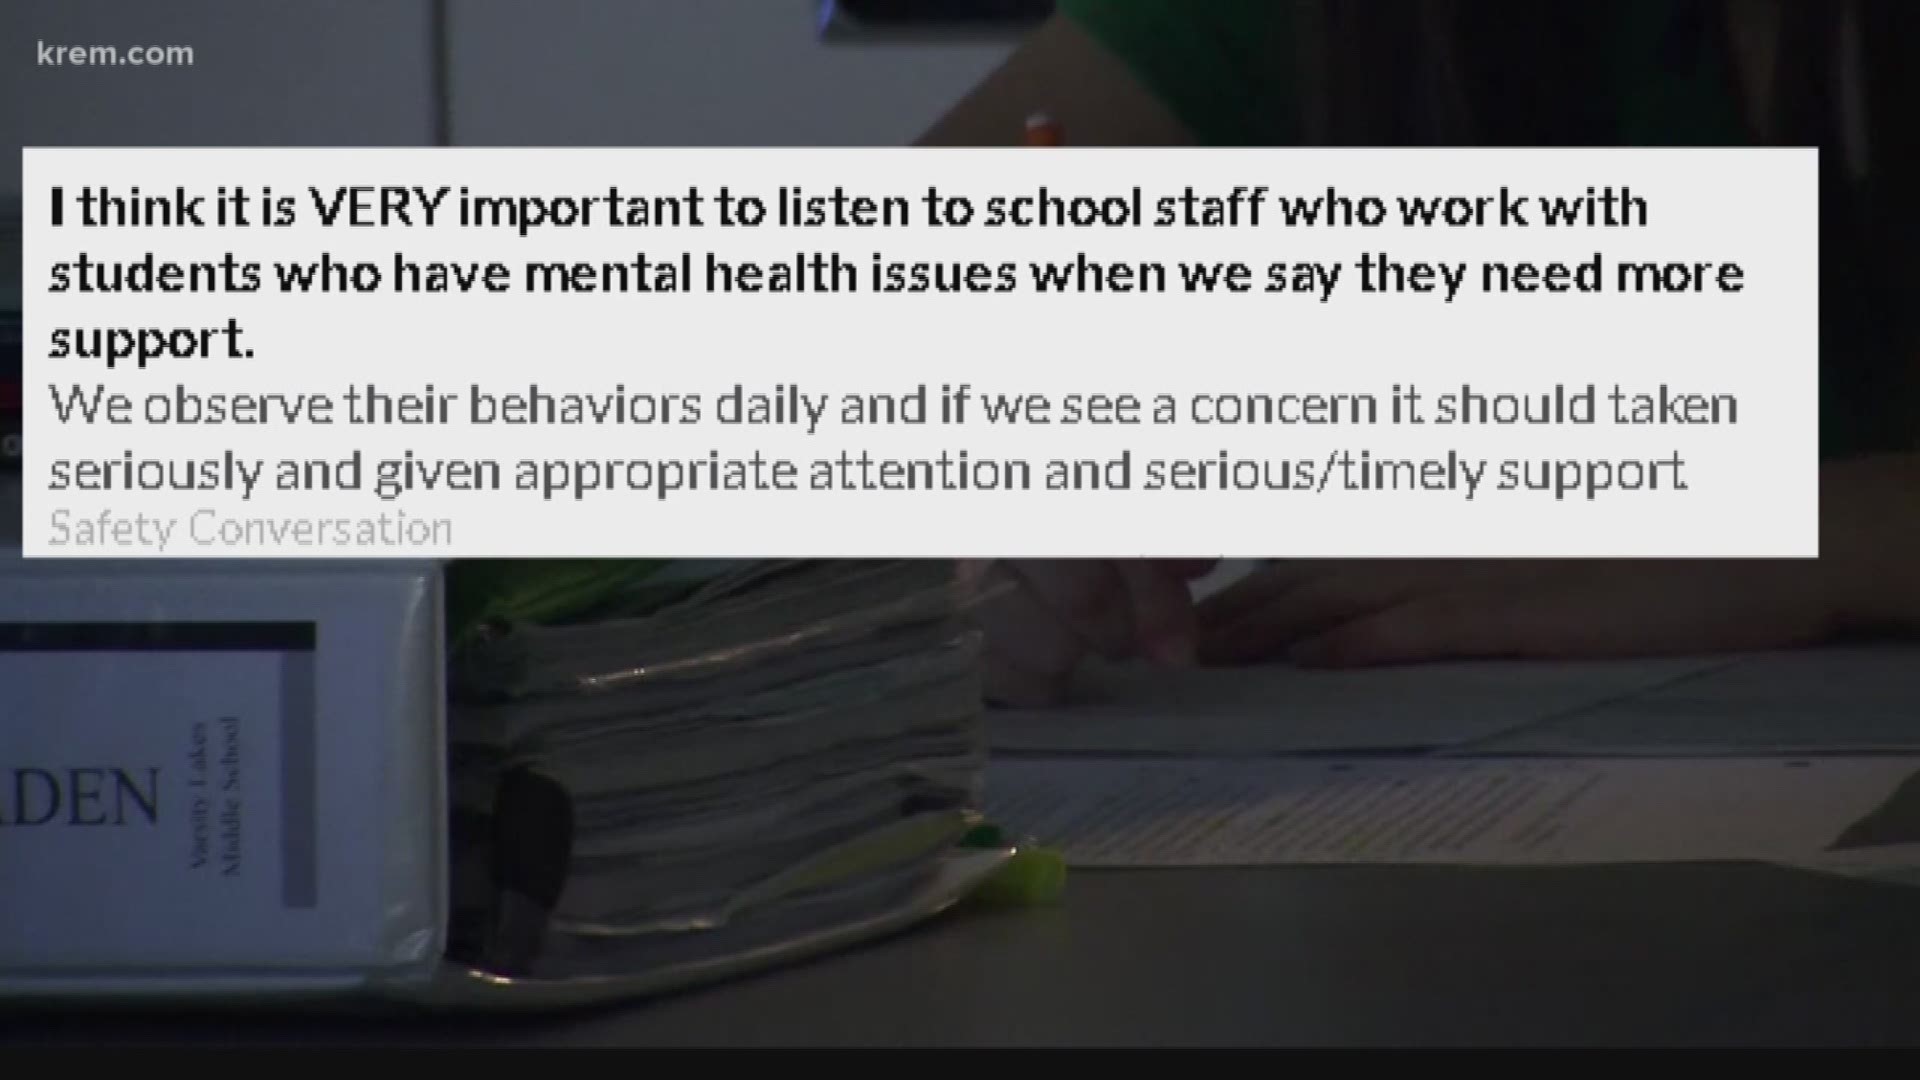 Spokane Public Schools recently released results from a survey asking people what they thought was most important for school safety. Top answers included behavior and mental health.